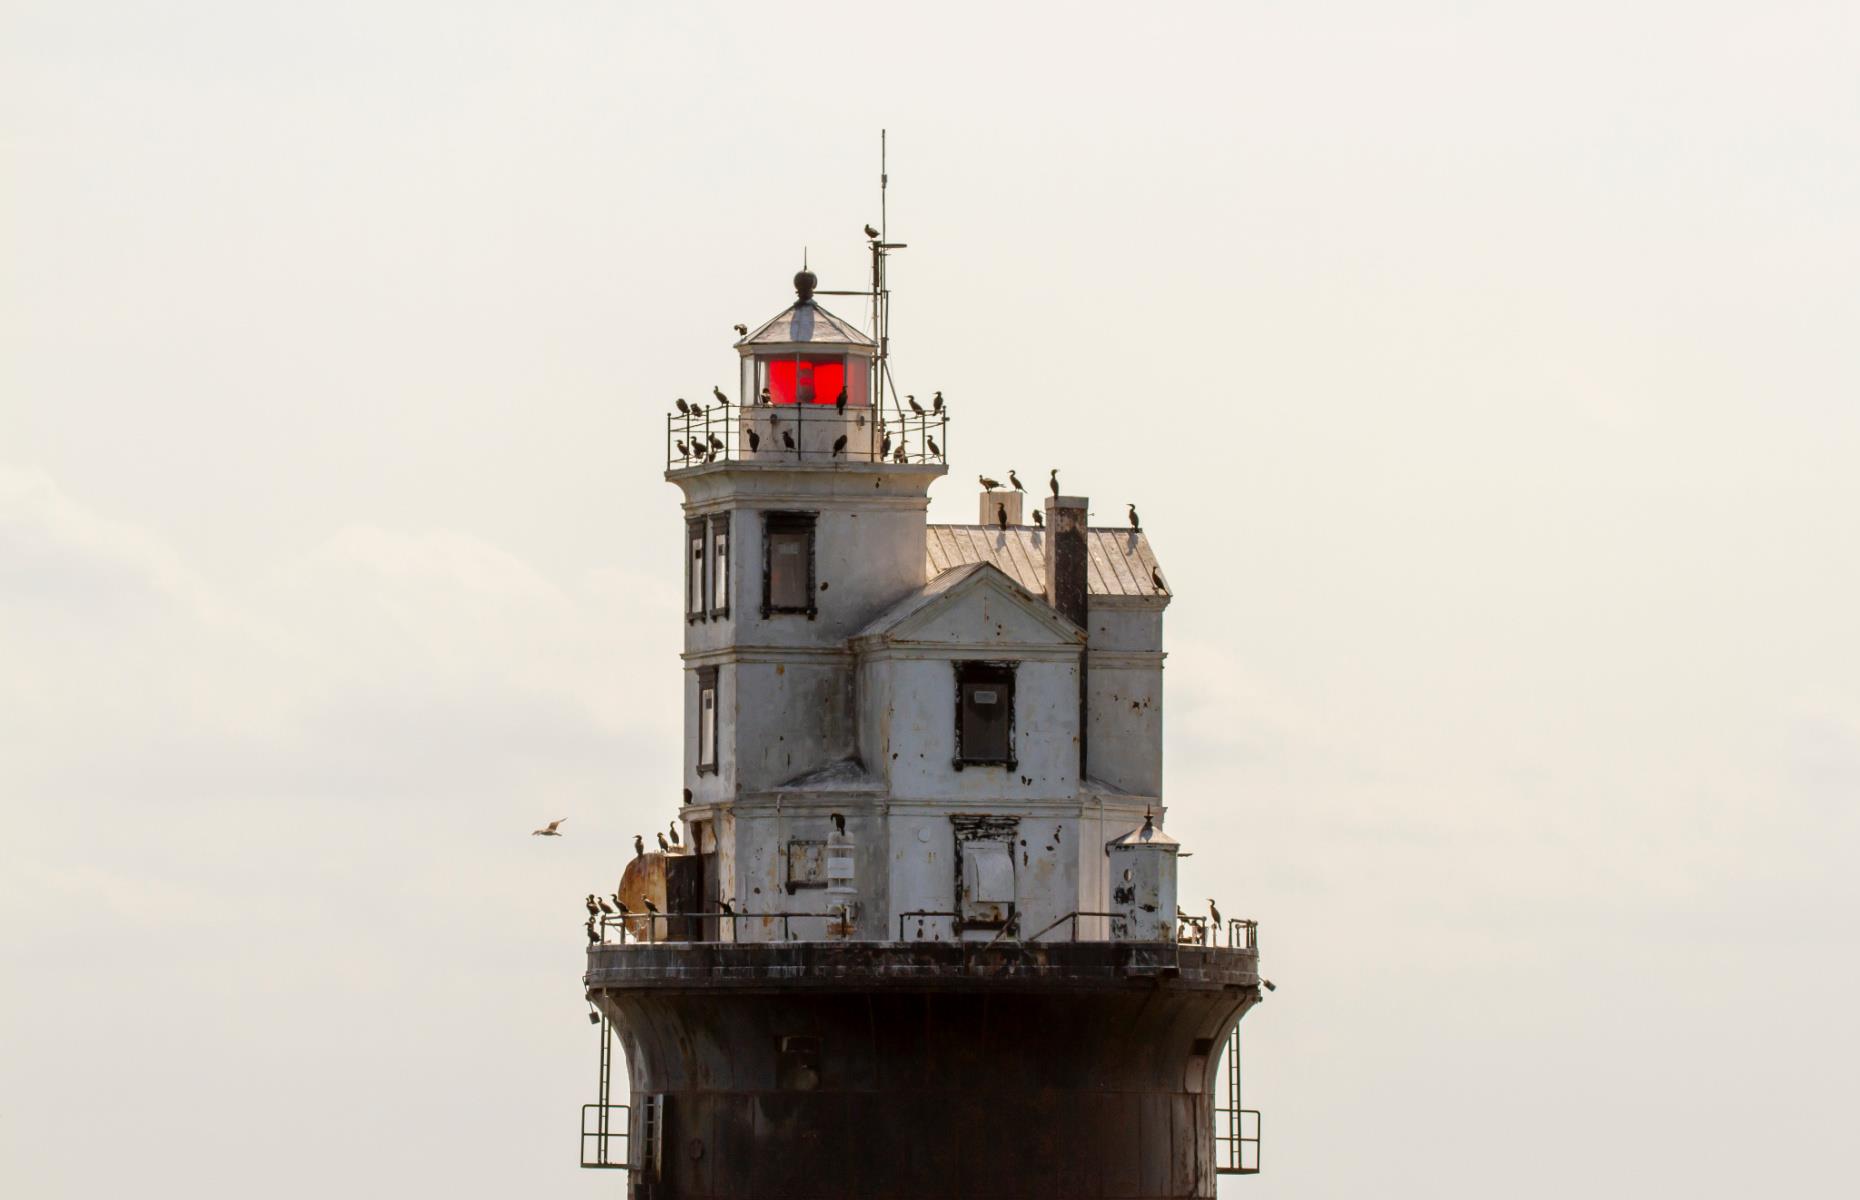 <p>It’s not often that you’ll see a Victorian-style house built in the middle of the ocean, but this strange structure sits a full 11 miles (18km) off the coast of Delaware. Completed in 1886, the <a href="https://www.delawarebaylightkeeper-friend.org/fourteen_foot_bank.htm">Fourteen Foot Bank Light</a> is the first lighthouse of its kind, built with a pneumatic caisson (a kind of watertight box). The lighthouse is still in operation, but it’s now automated with no keeper living in the three-story house on top of the base.</p>